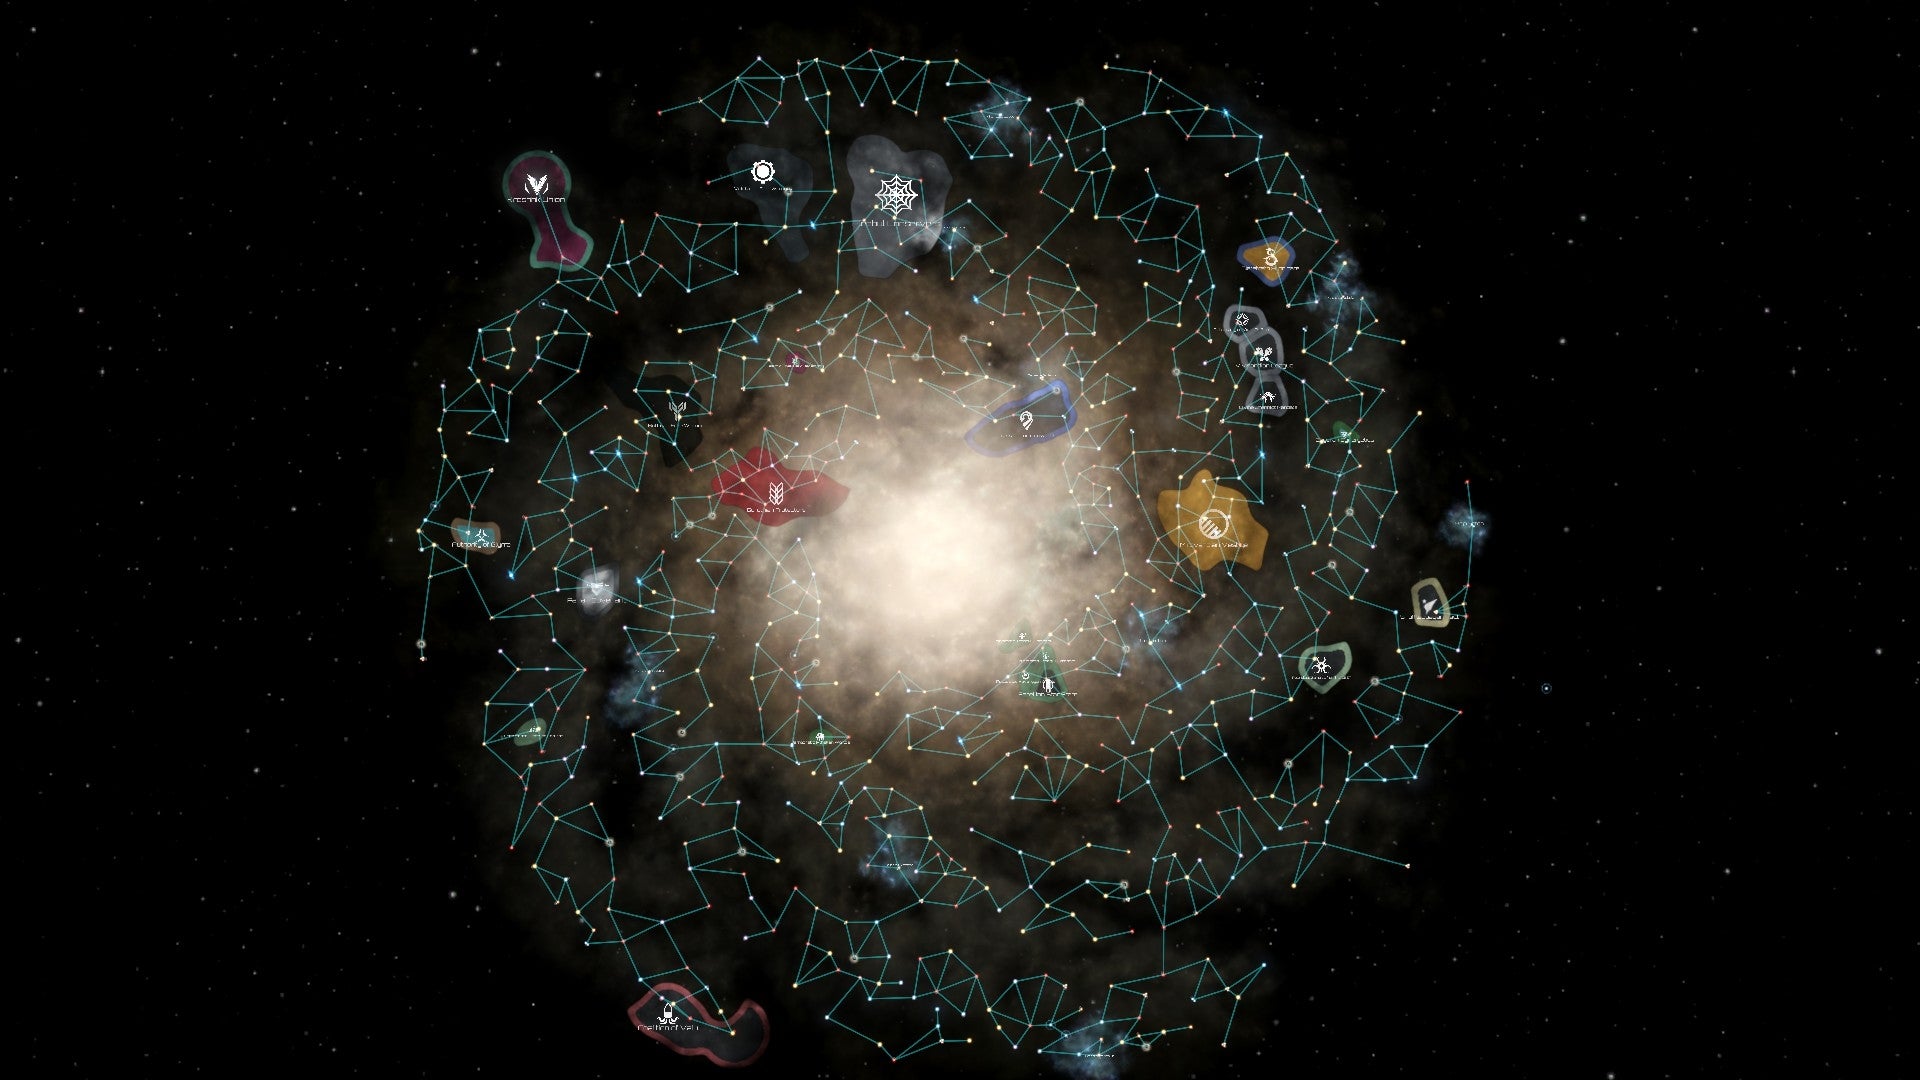 A screenshot from the 3.6 Orion update for Stellaris showing a 6-arm spiral galaxy